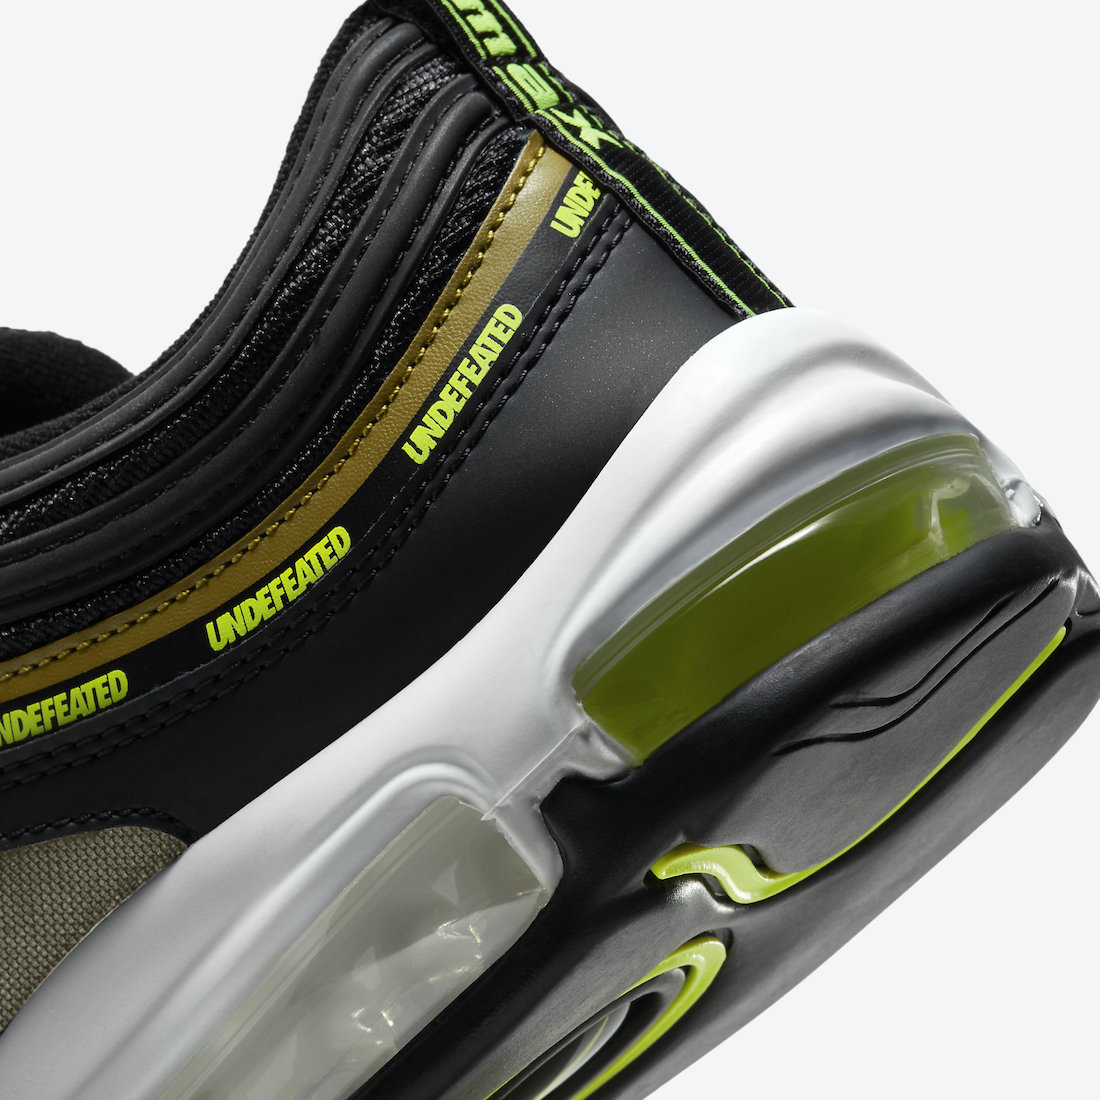 Undefeated Nike Air Max 97 Black Volt DC4830 001 Release Date 7